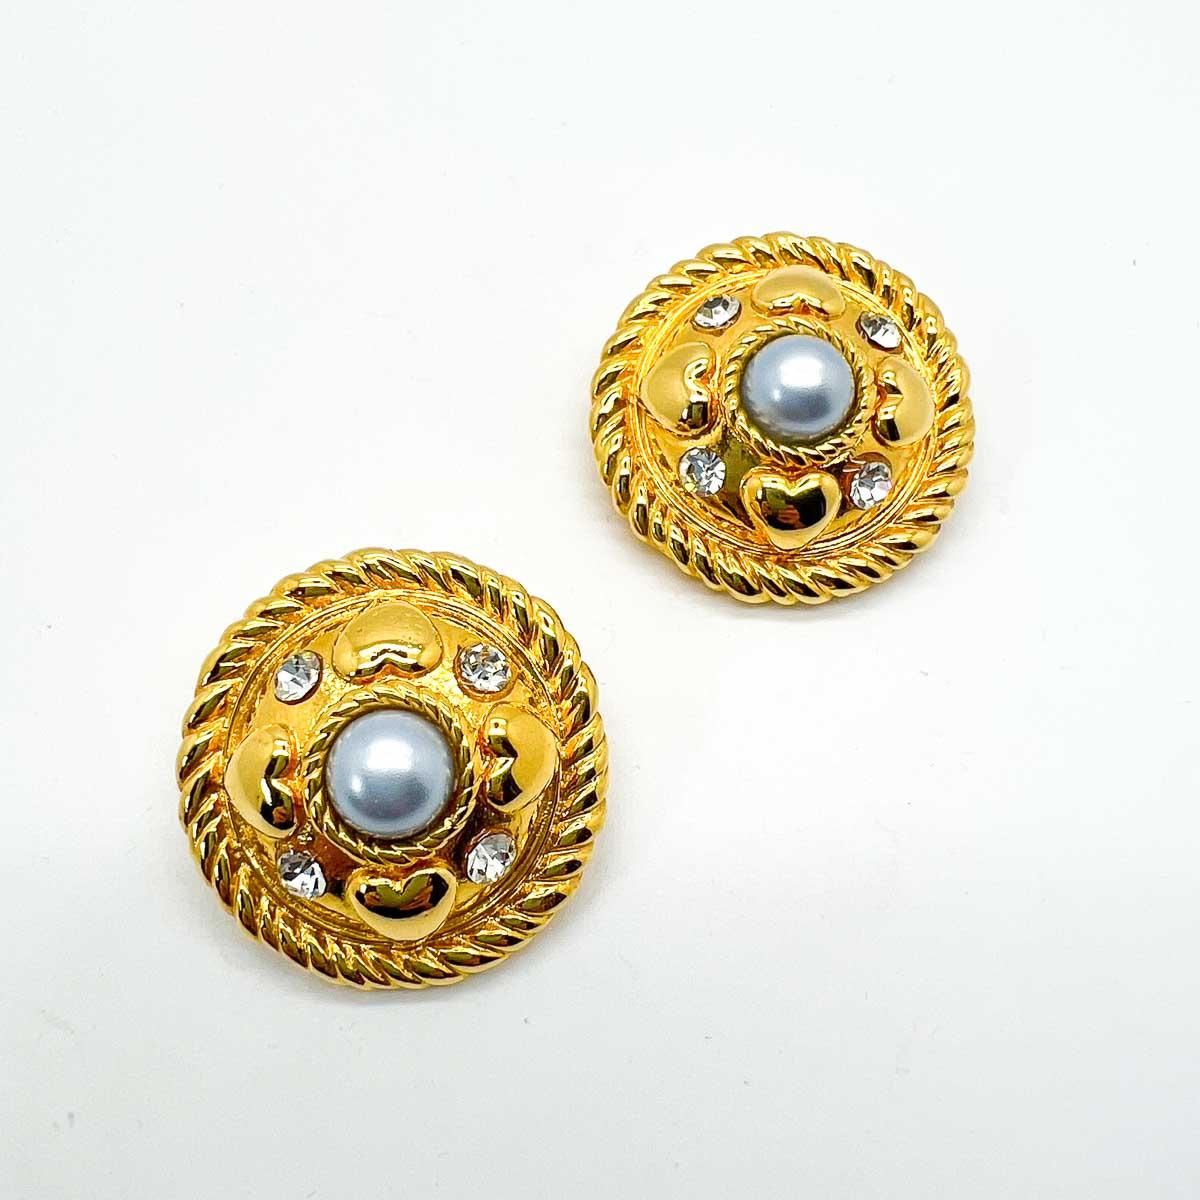  fabulous pair of Vintage Escada Grey Pearl Earrings embellished with crystals and heart motifs. Think eighties runway and a time when the very best statement earrings were born. A perfect statement couture earring that embodies the eighties and